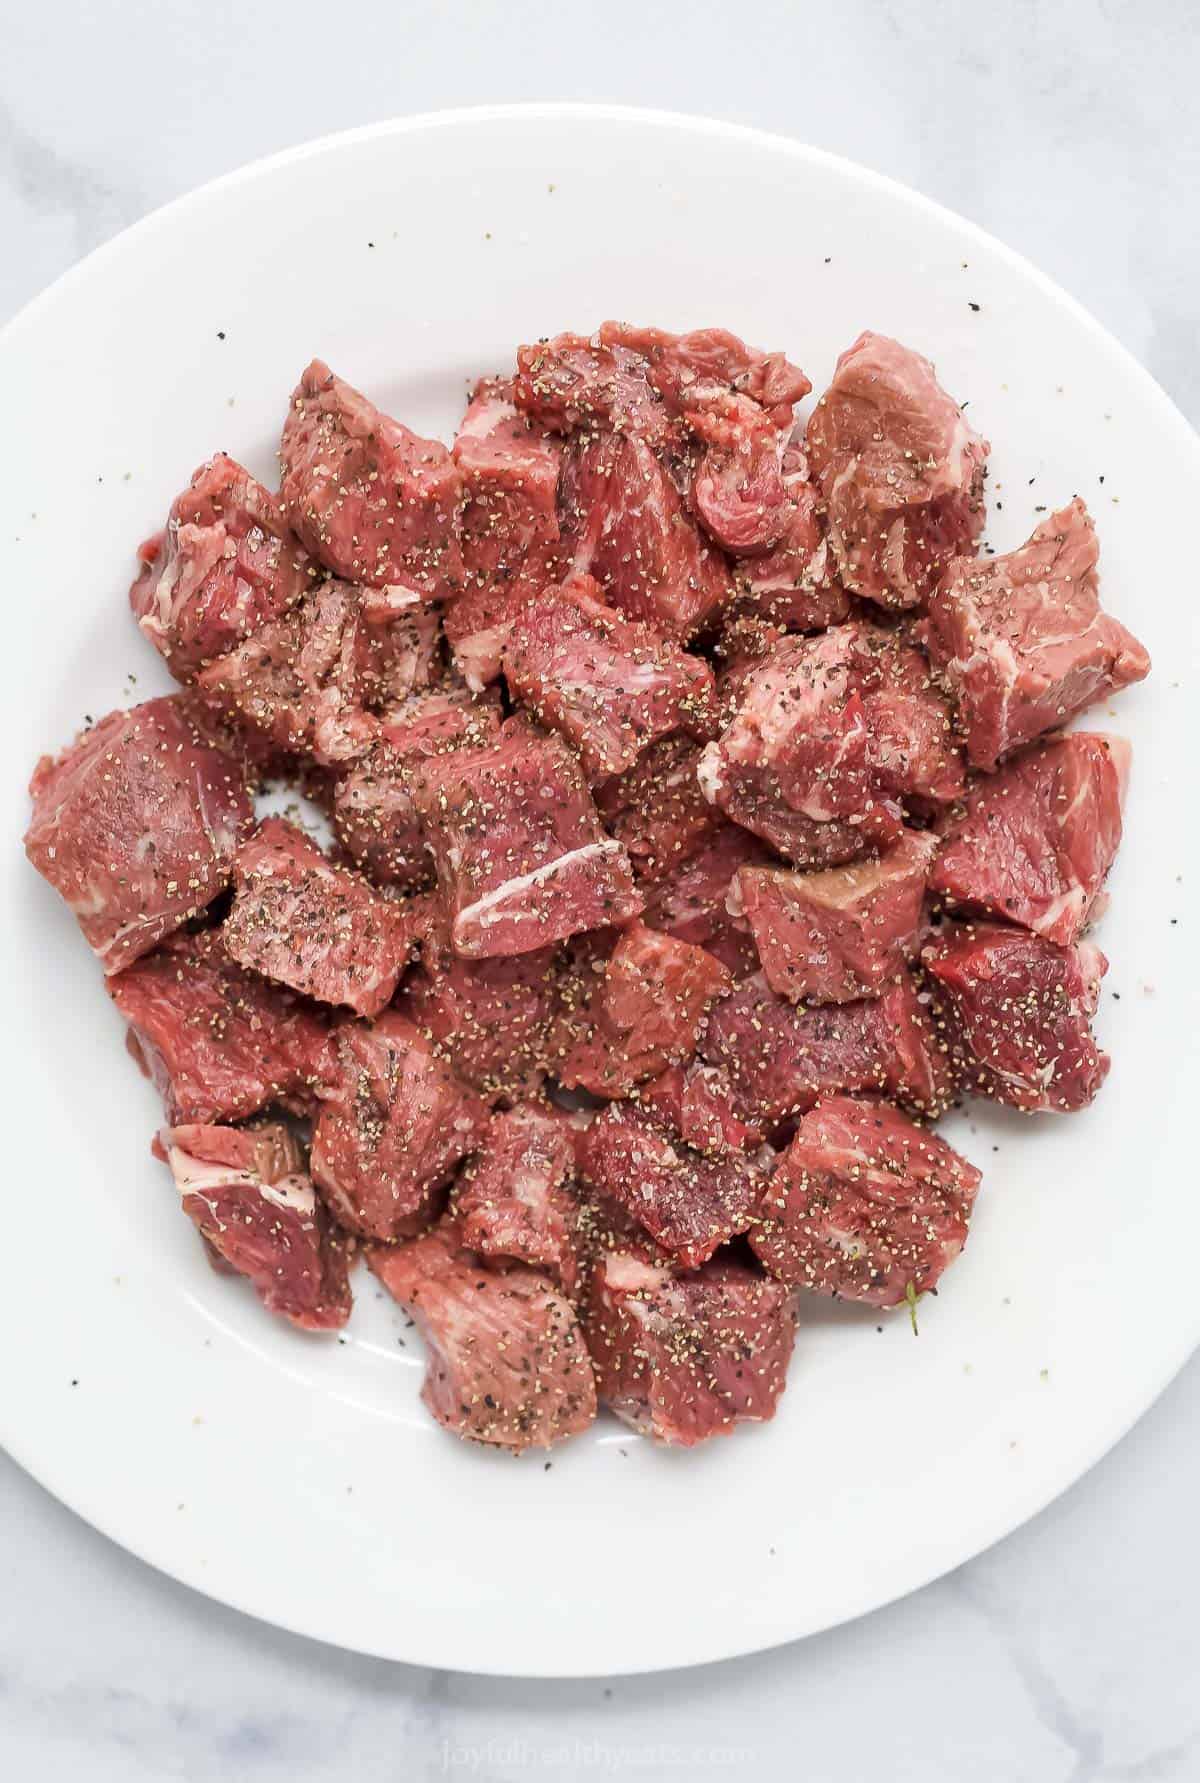 Cubes of sirloin steak seasoned with salt and pepper on a white plate